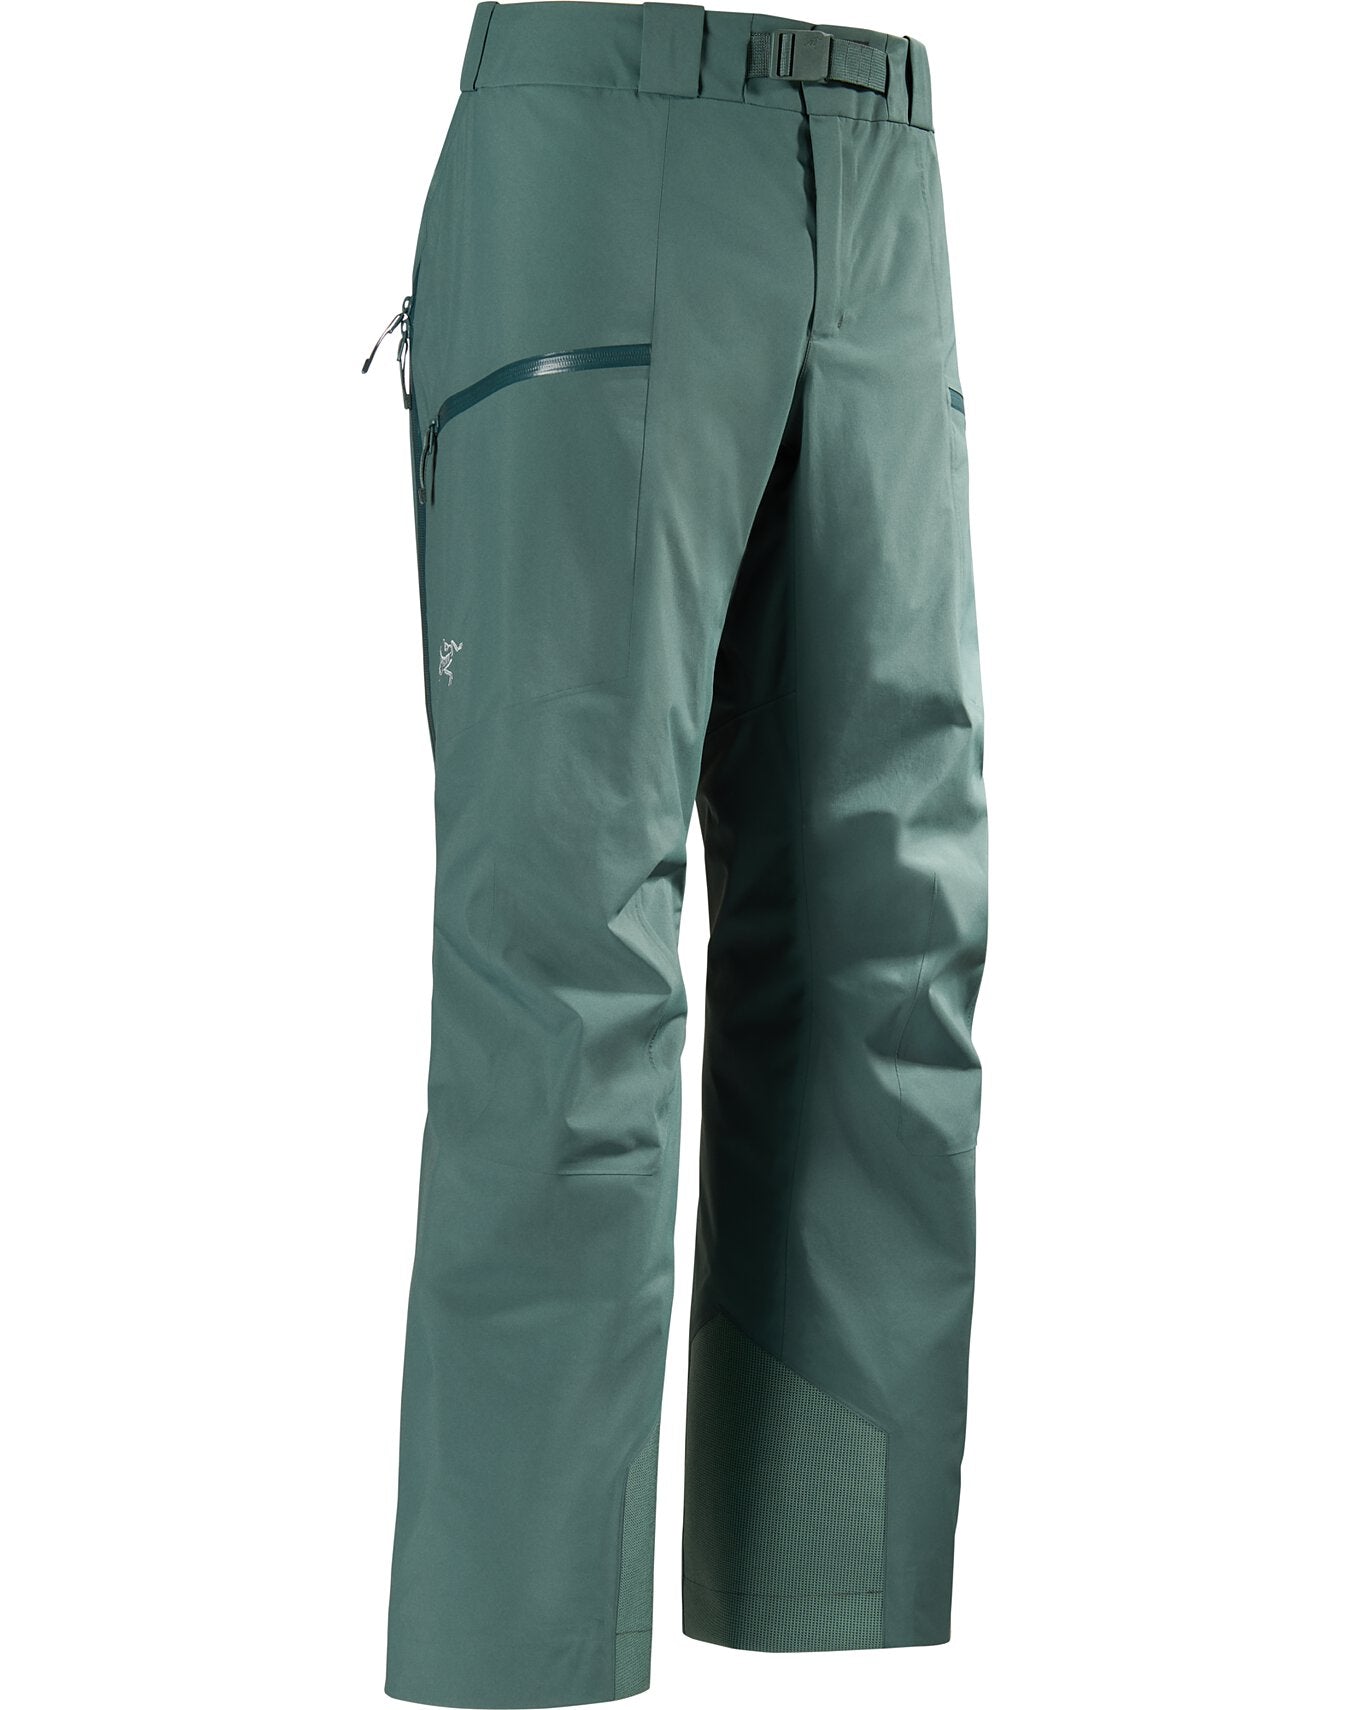 Sabre-Insulated-Pant-Boxcar.jpg